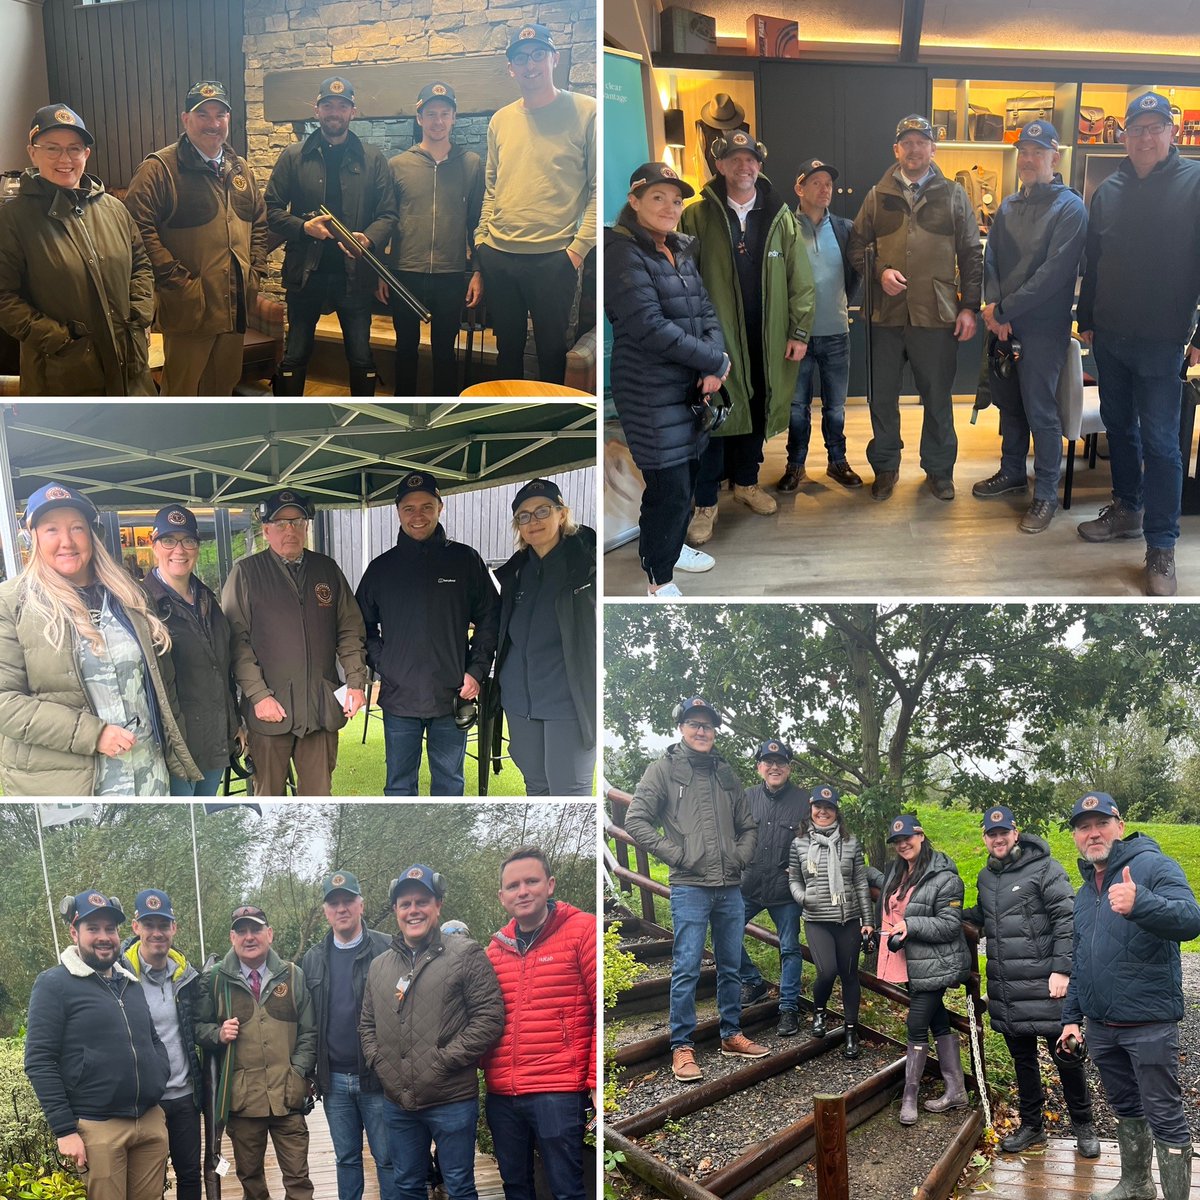 We won’t let a little thing like a storm stop us ⛈️ A very warm welcome & delicious bacon sarnies to fill us up for a (wet & windy) morning @thimbleby_shoot So nice to welcome clients & friends to this stunning venue today😃 #TheClearAdvantage #StormBabet